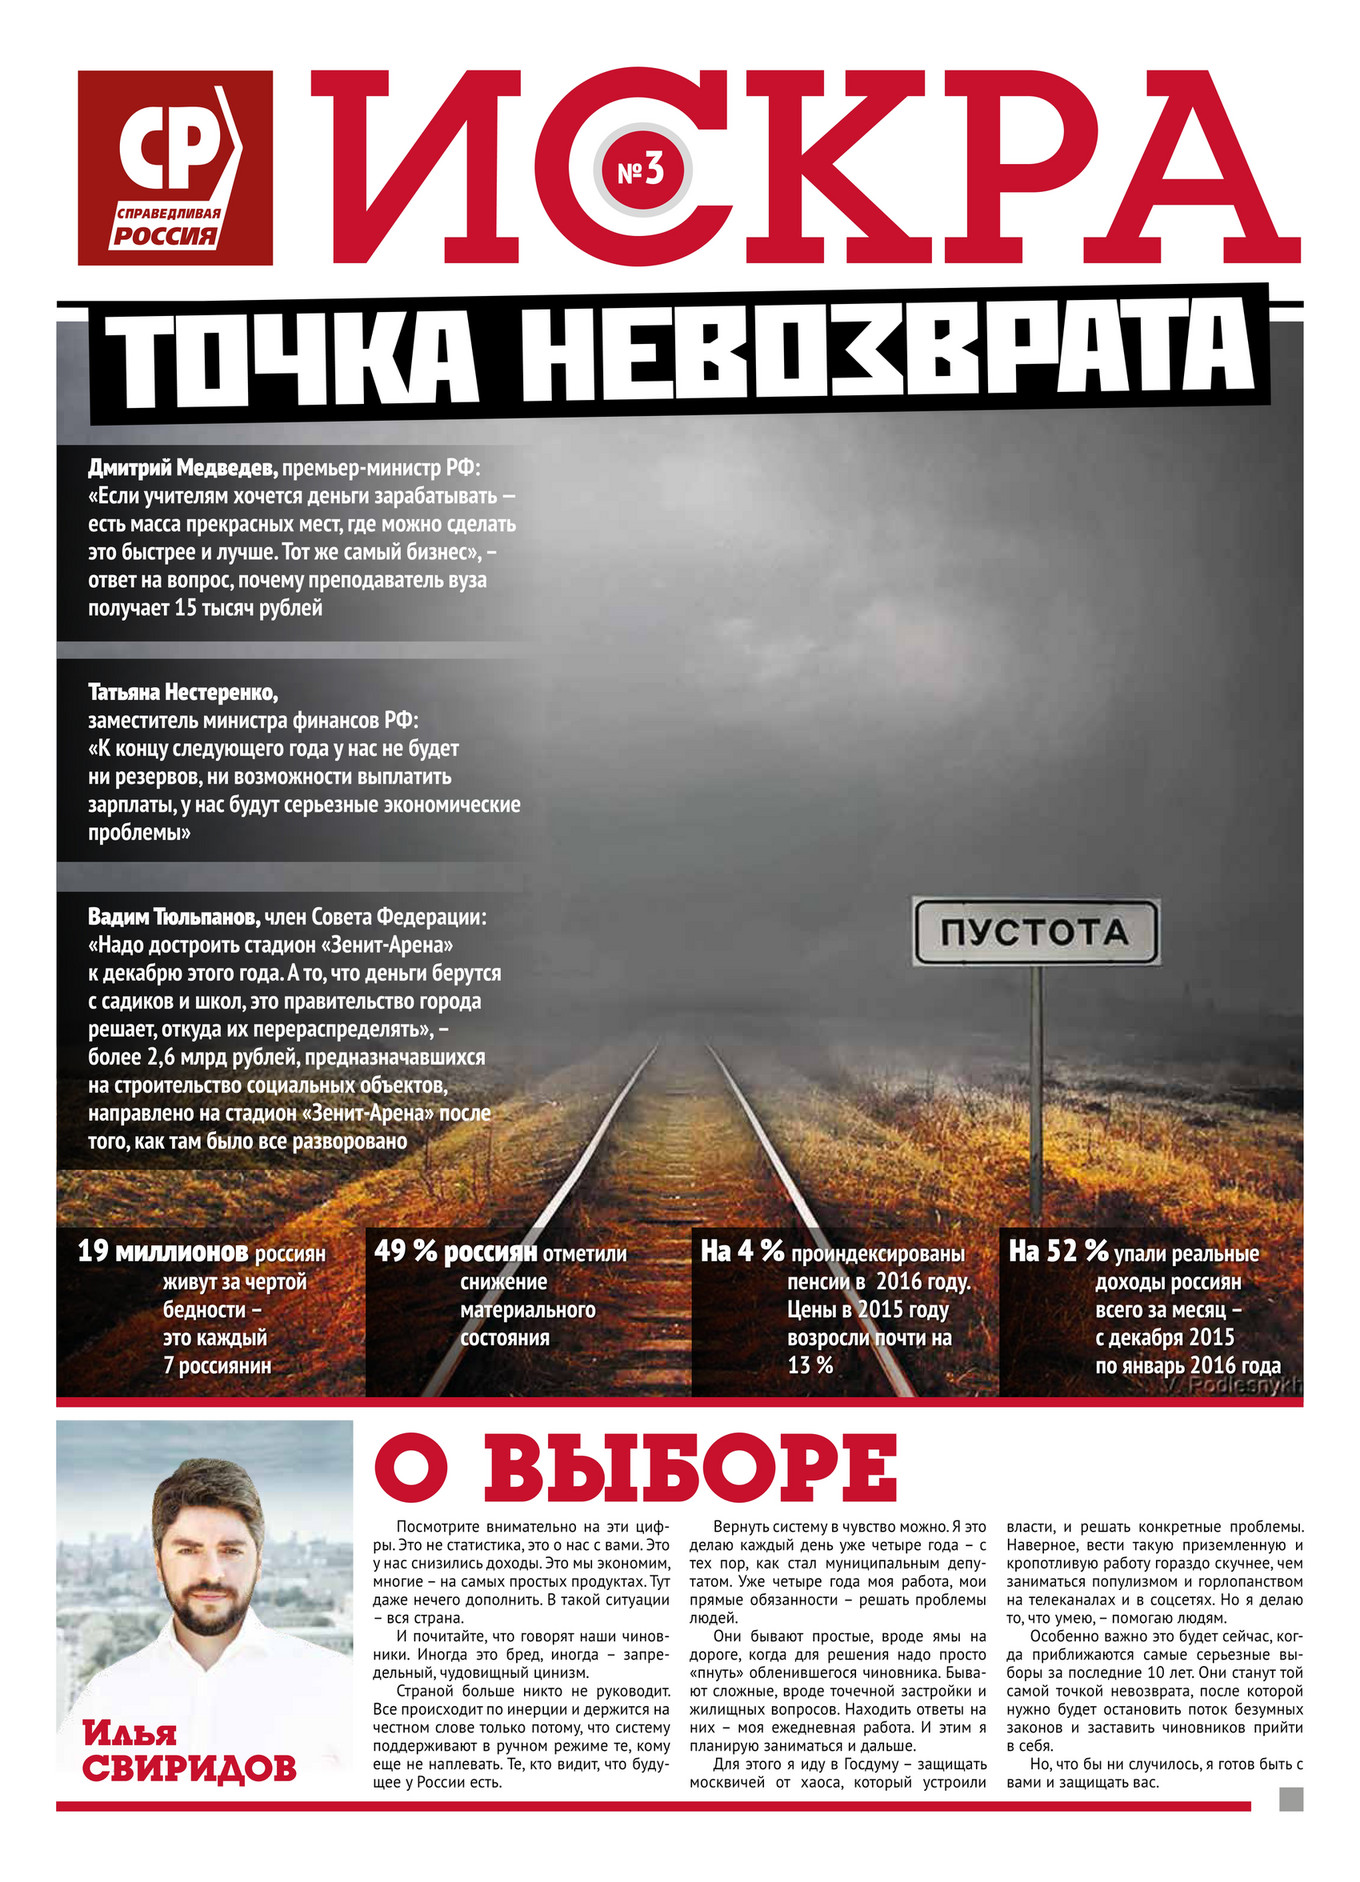 My publications - Искра 3 - Page 1 - Created with Publitas.com